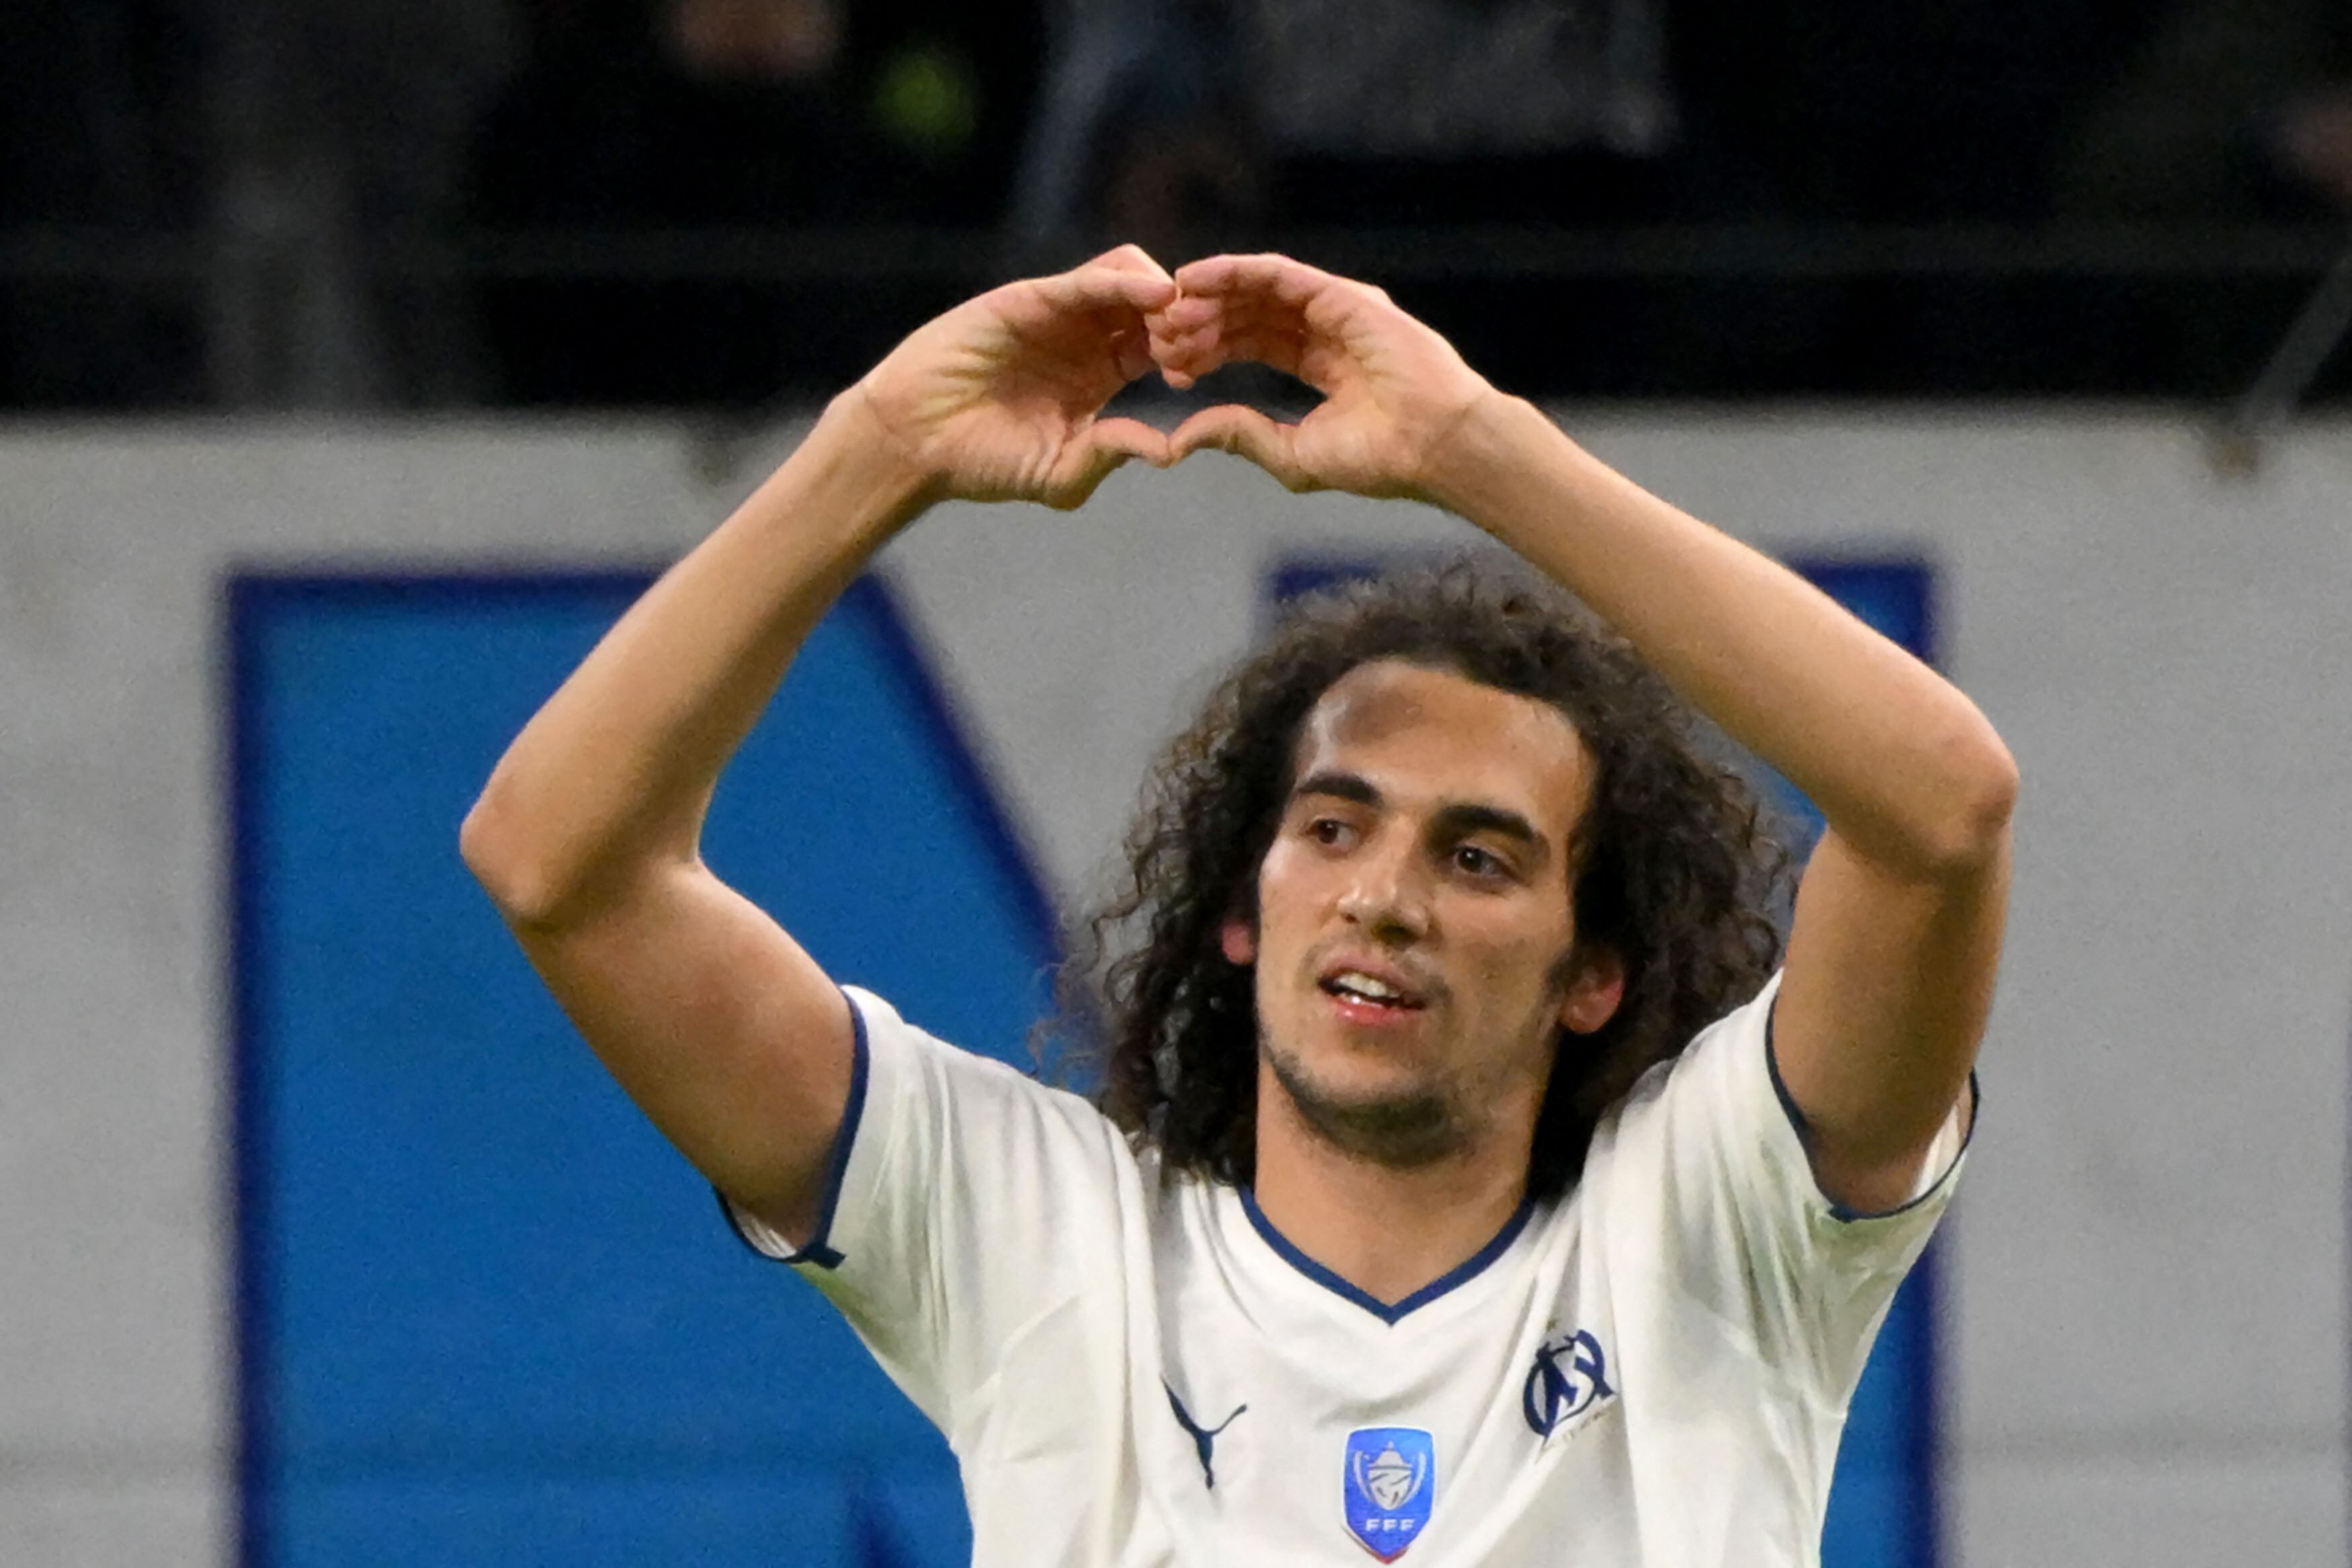 Marseille's French midfielder Matteo Guendouzi celebrates scoring his team's first goal during the French Cup round of 32 football match between Olympique de Marseille (OM) and Stade Rennais FC at the Stade Velodrome in Marseille, southern France on January 20, 2023. (Photo by Nicolas TUCAT / AFP)